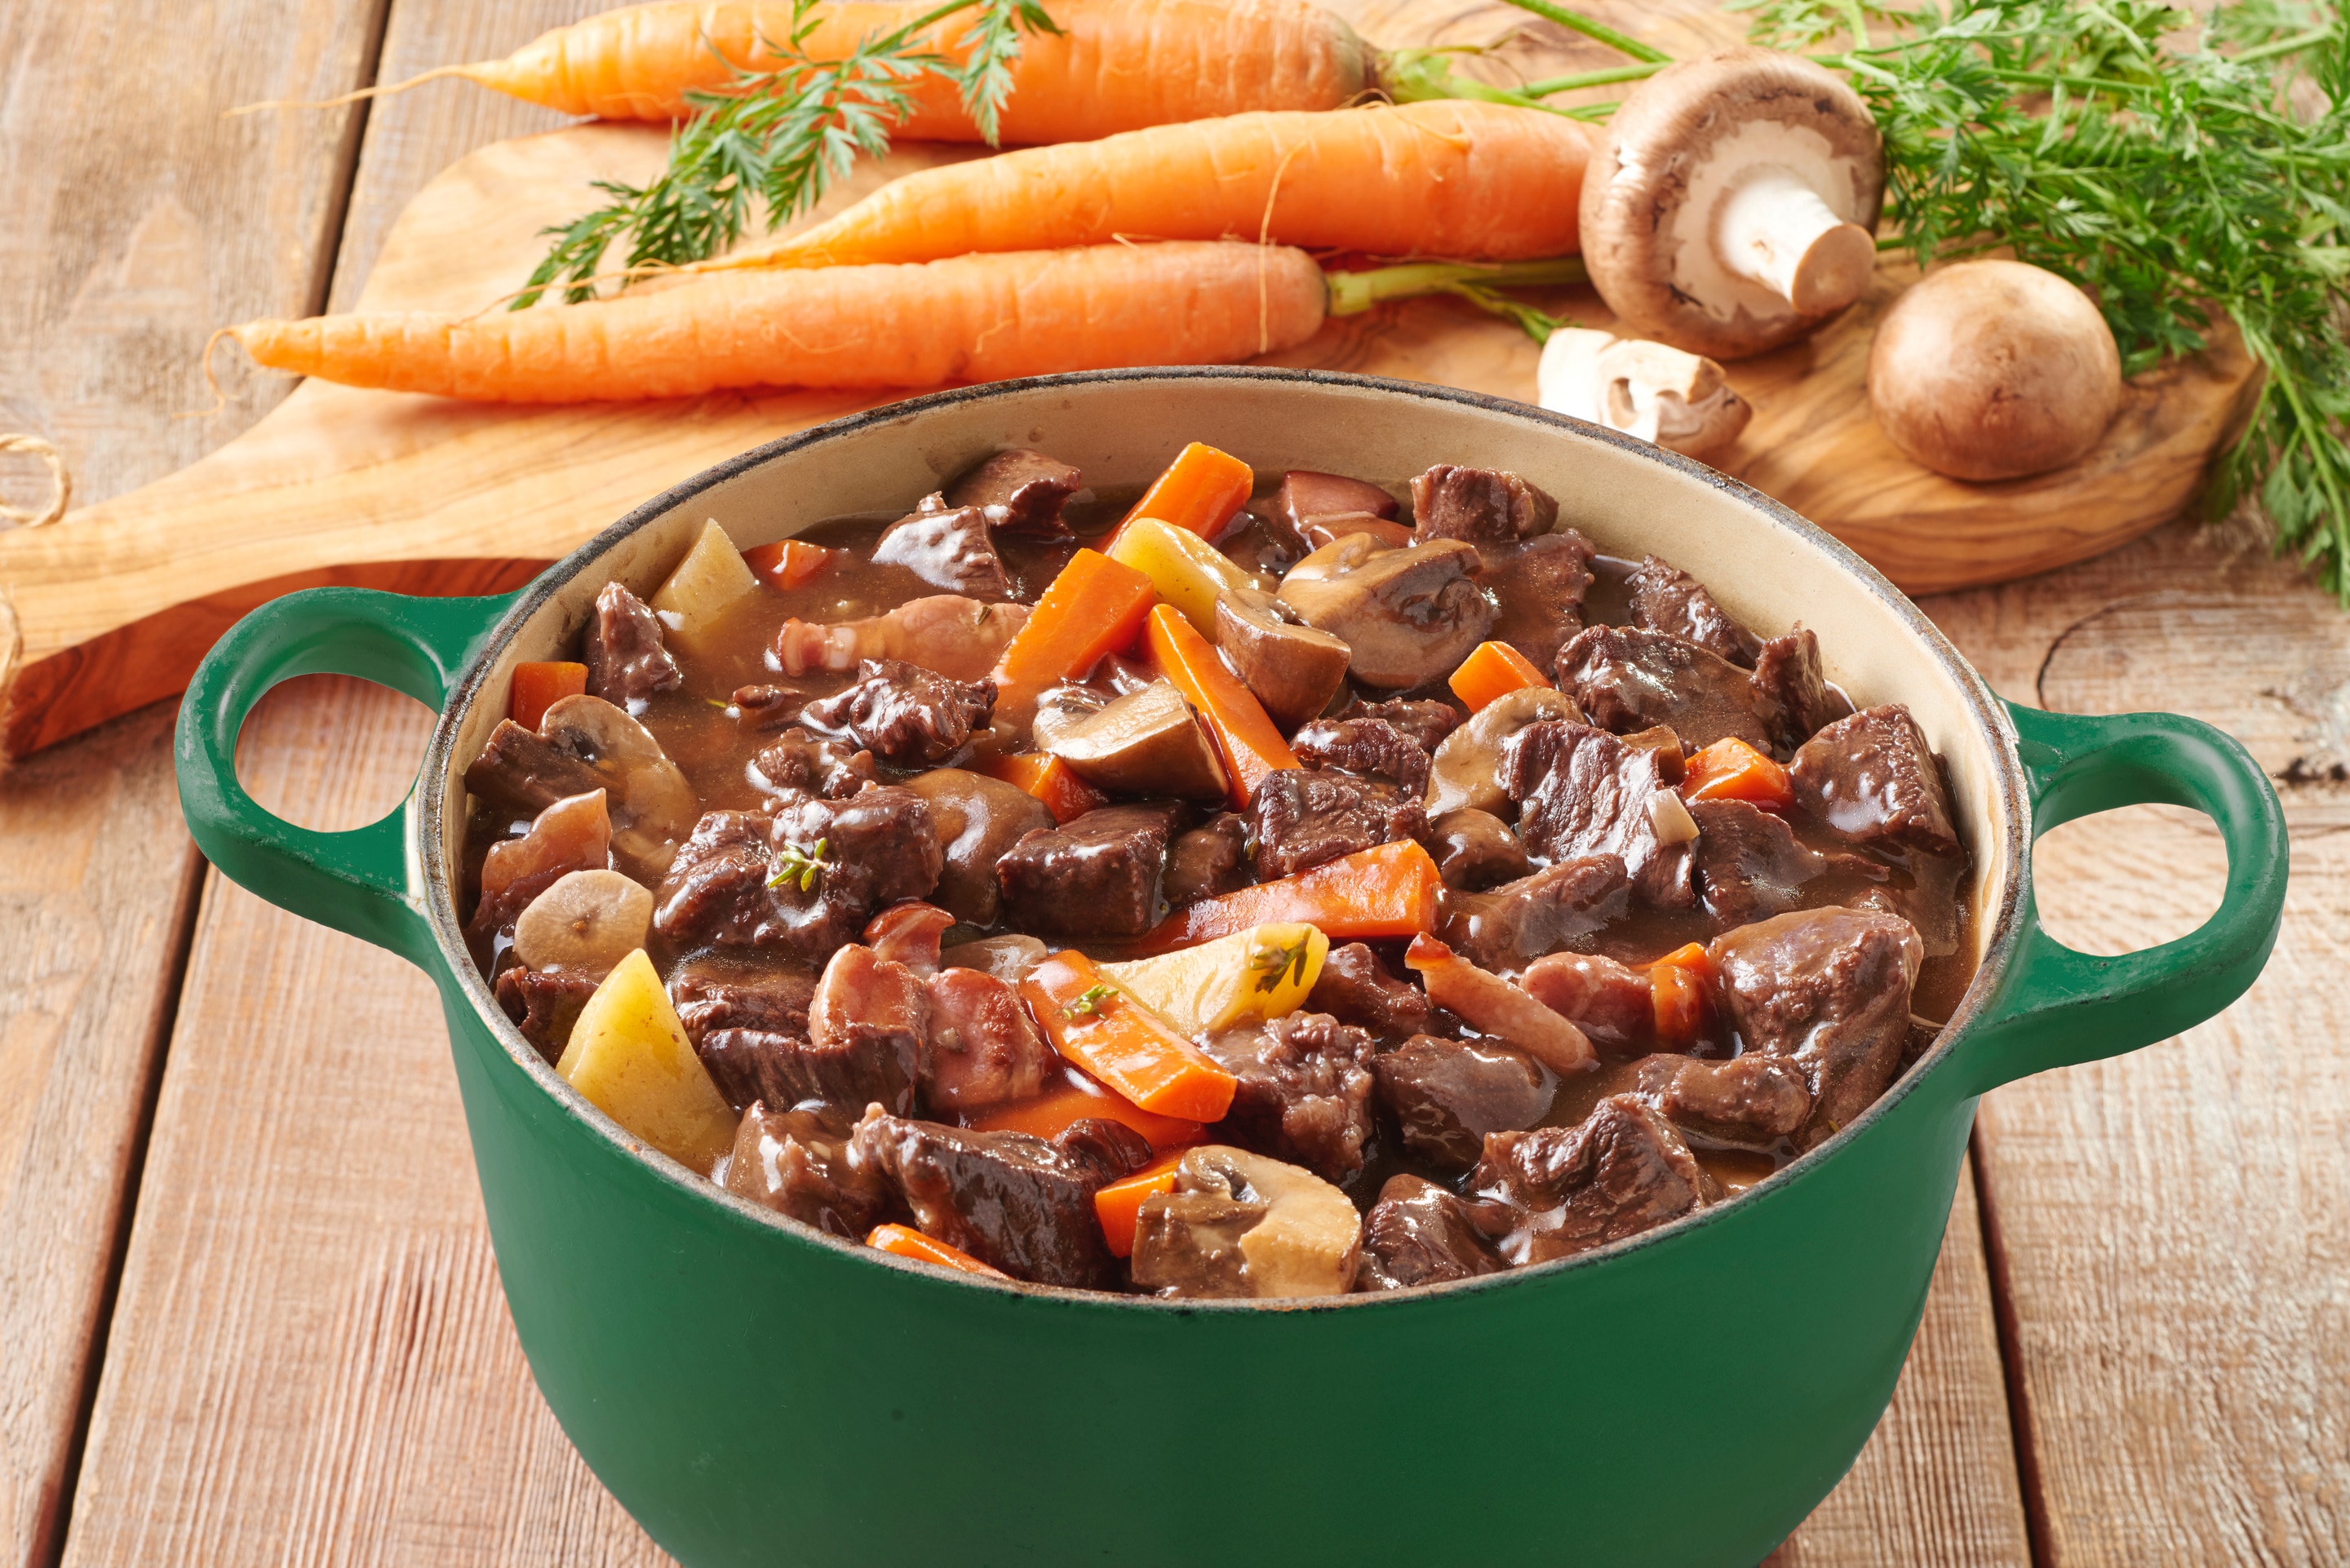 Rich Beef Bourguignon containing carrots, potatoes and mushrooms in an orange casserole pot.  In the background there is carrots and mushrooms on a wooden chopping board.